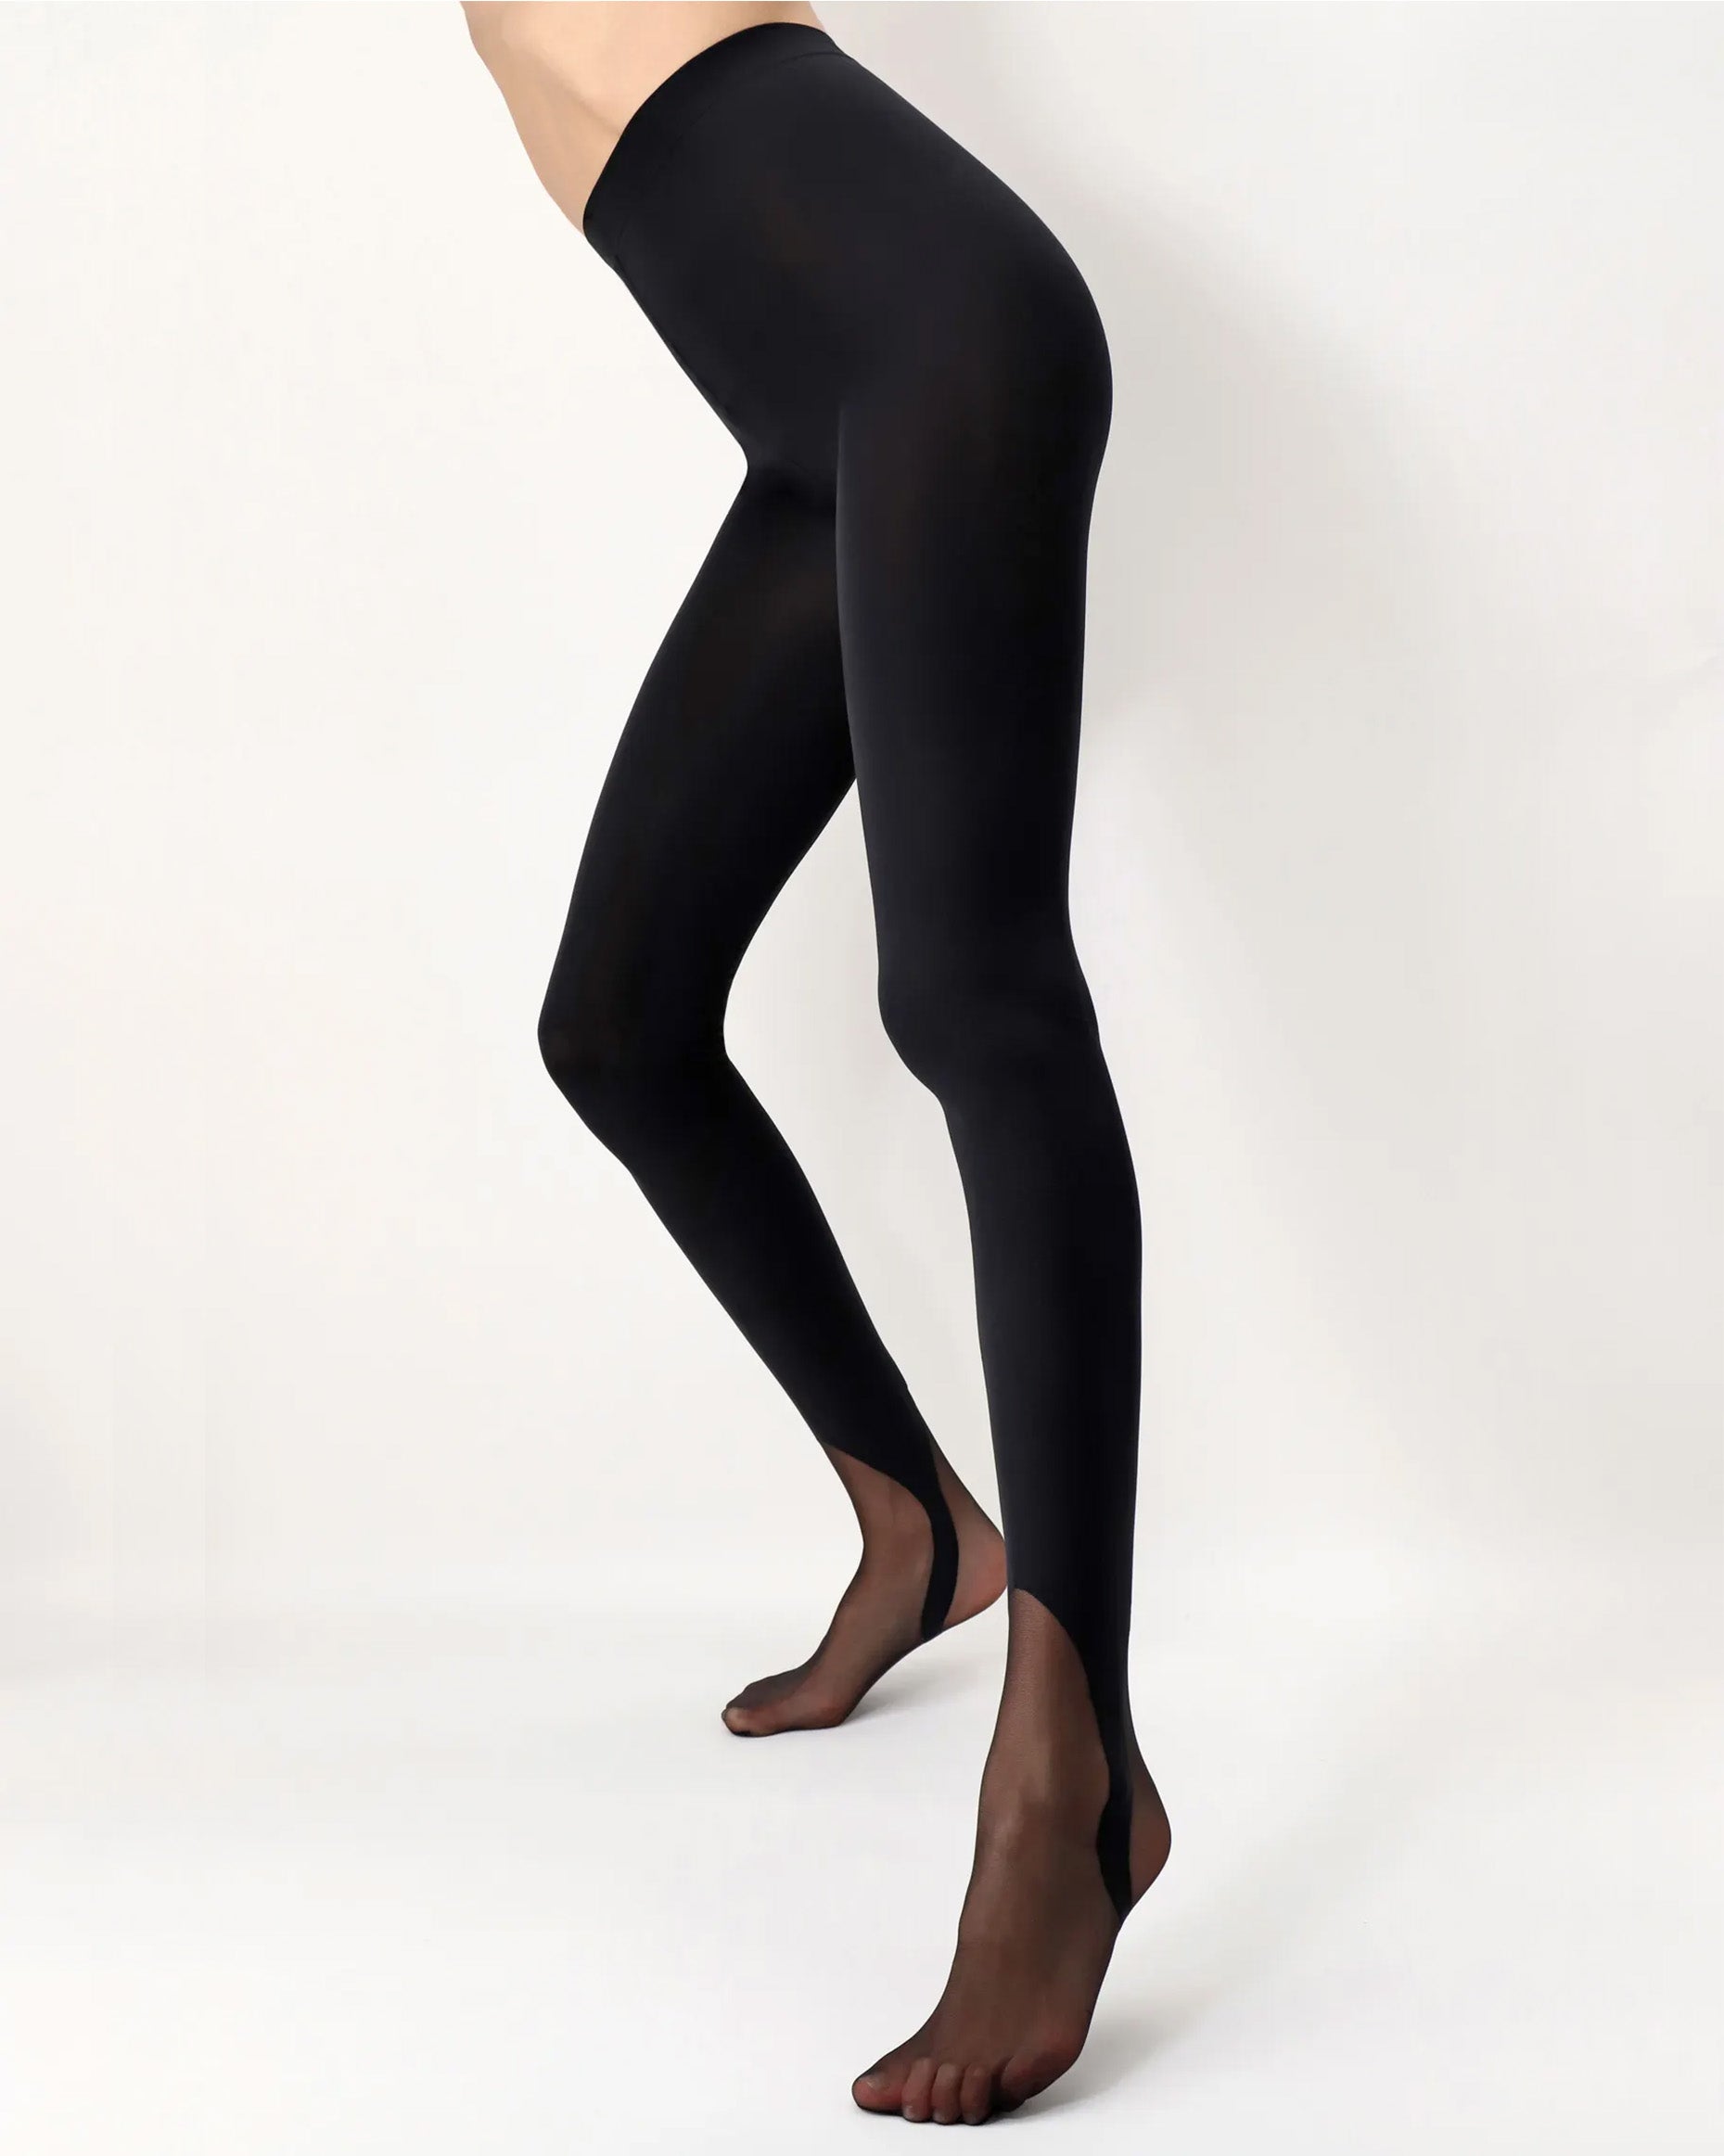 Oroblù Gaiter Tights - Opaque fashion tights with a sheer stir-up/ski pants effect on the foot and gusset.